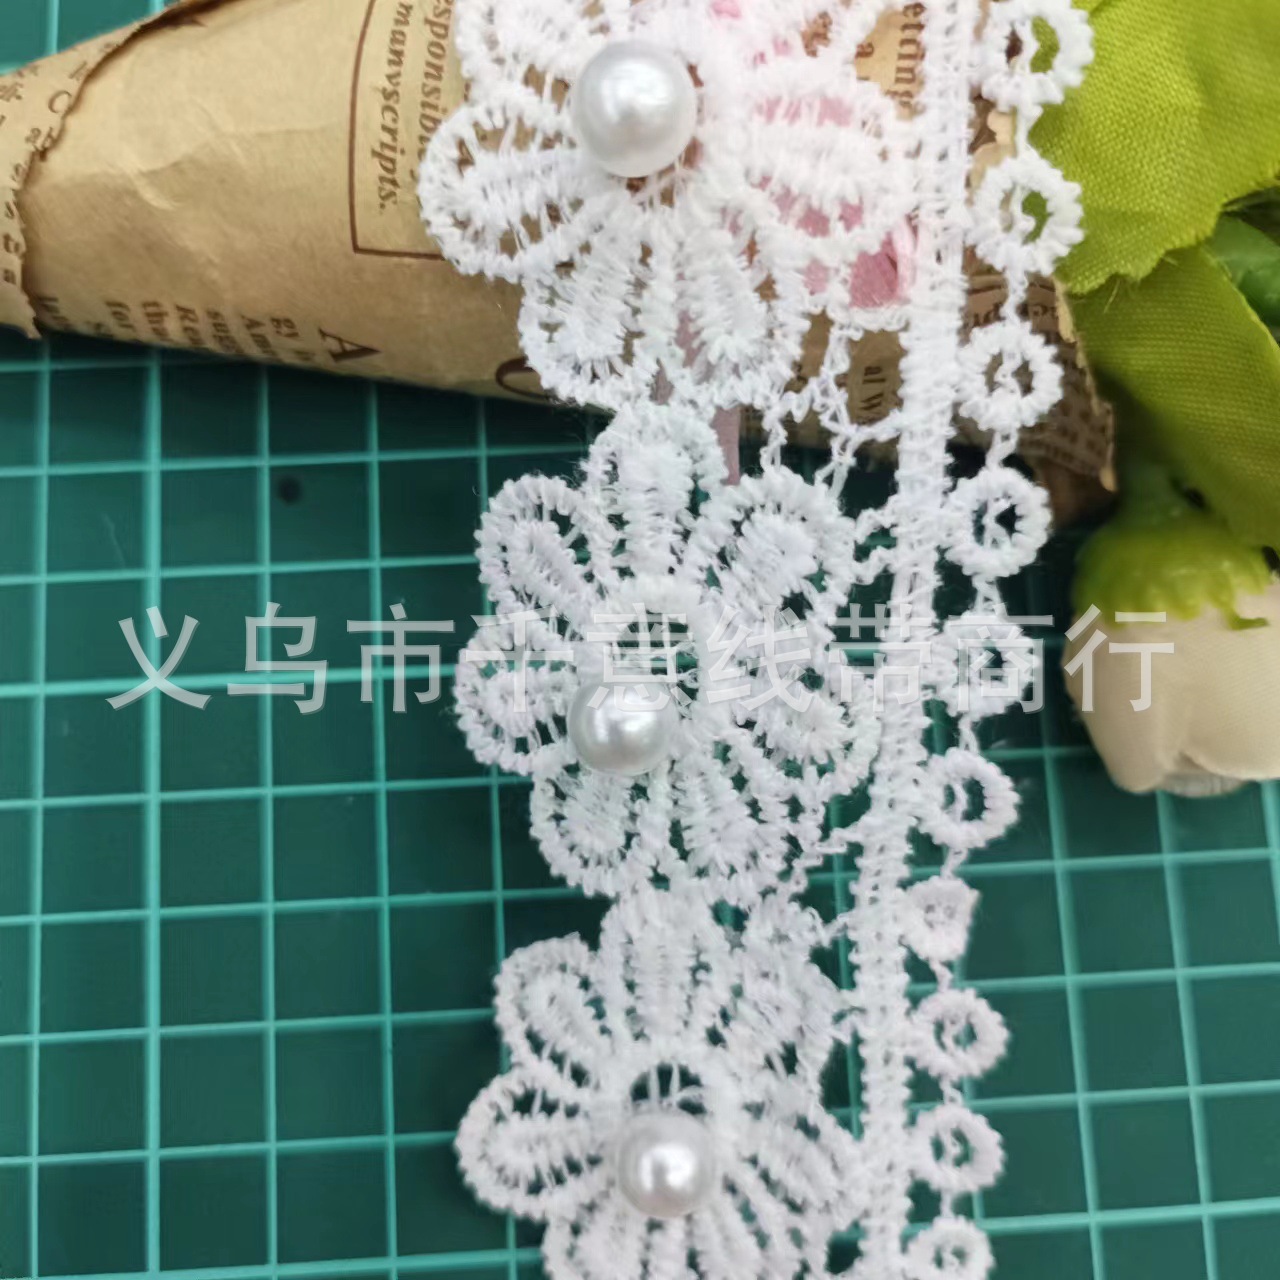 In Stock Bar Code Ougen Lace Accessories Cloth Flower Beaded Fabric Cloth Strip Material Decoration Handmade DIY Lace